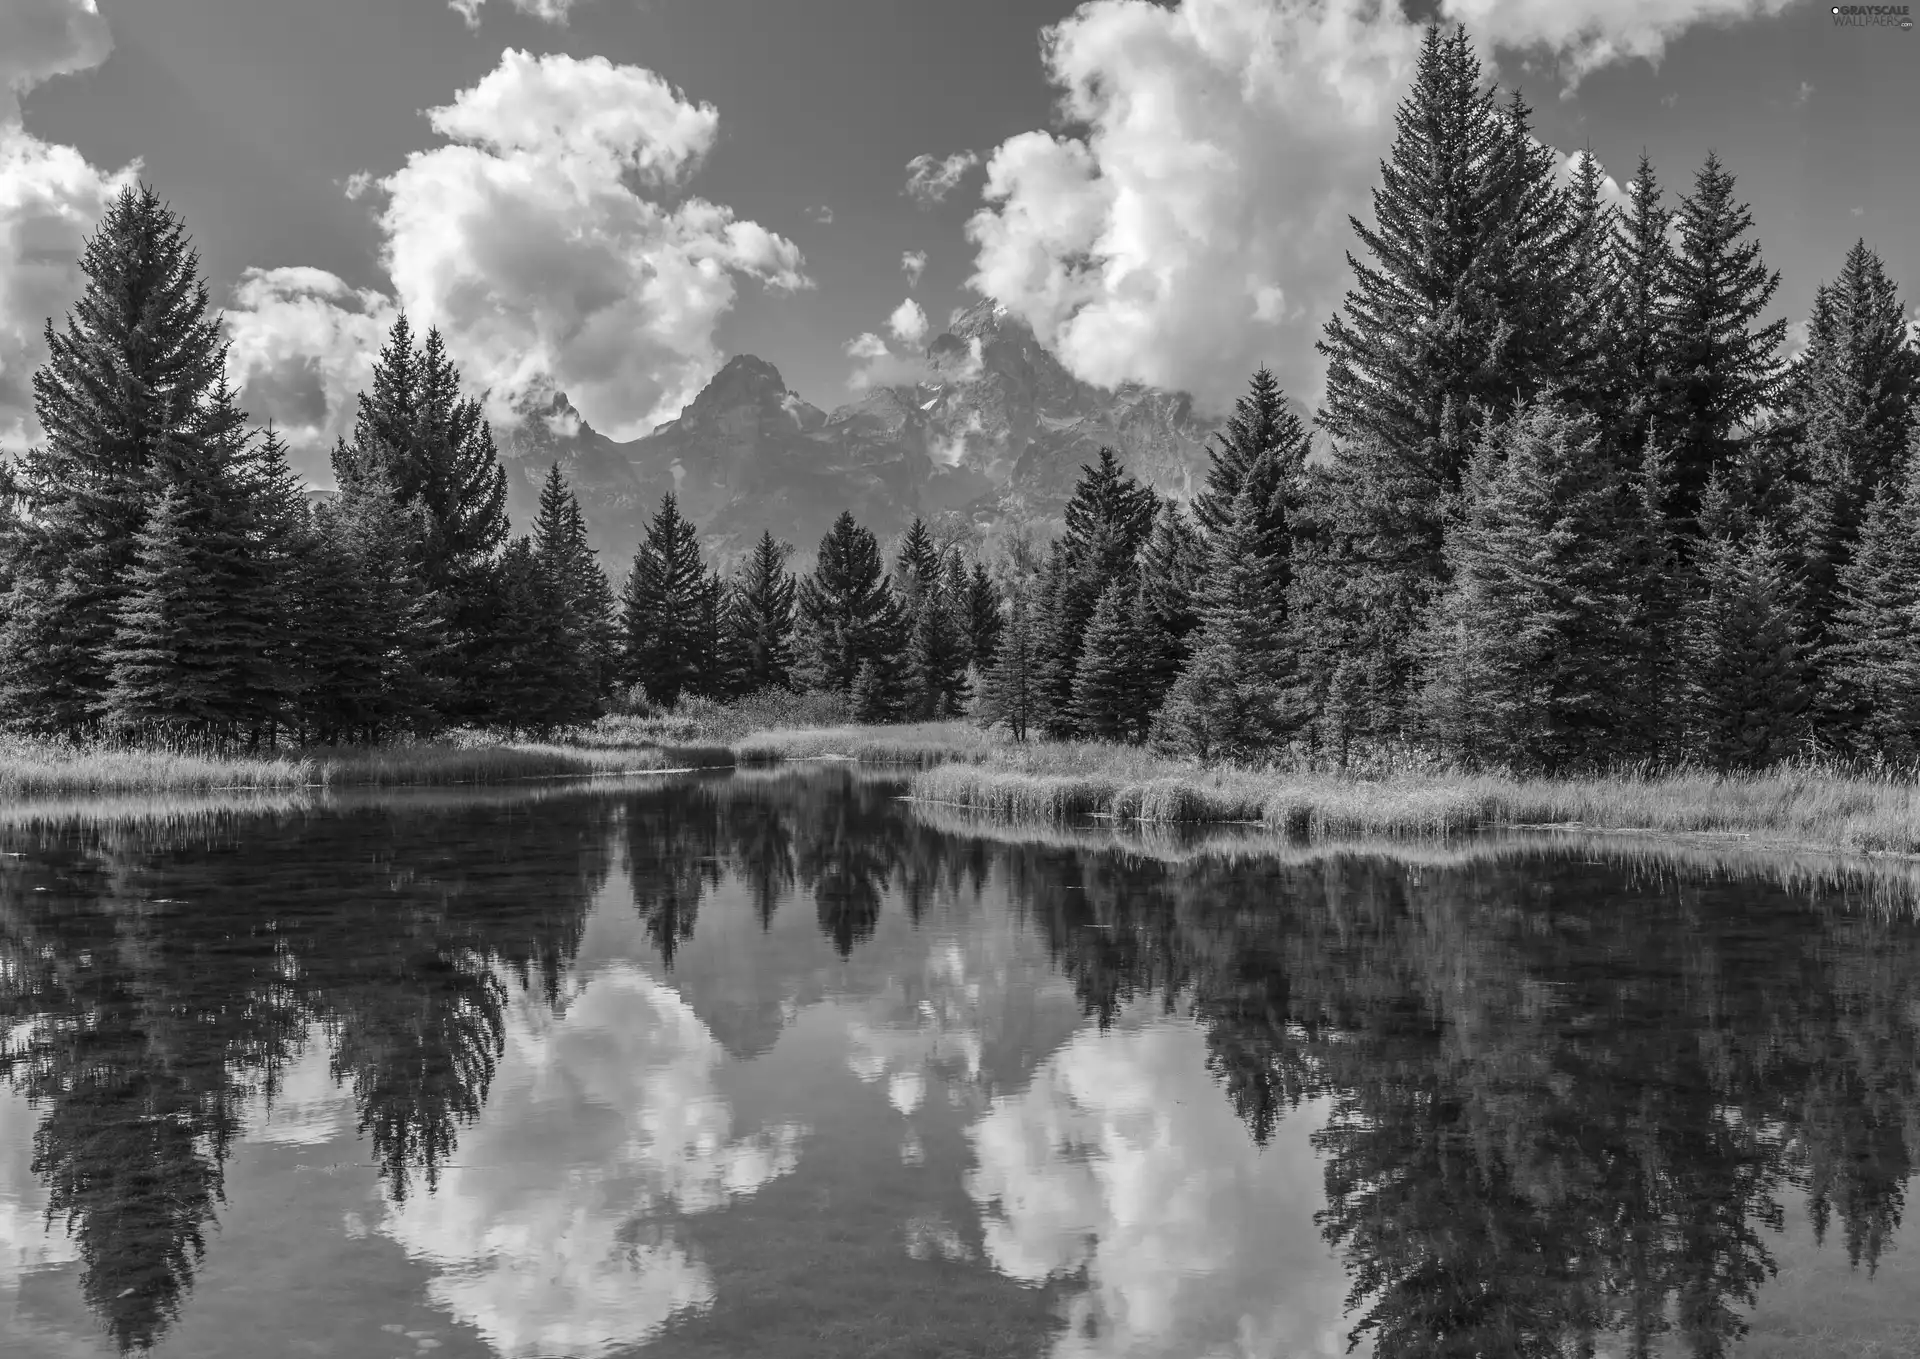 Spruces, trees, reflection, viewes, lake, clouds, Mountains